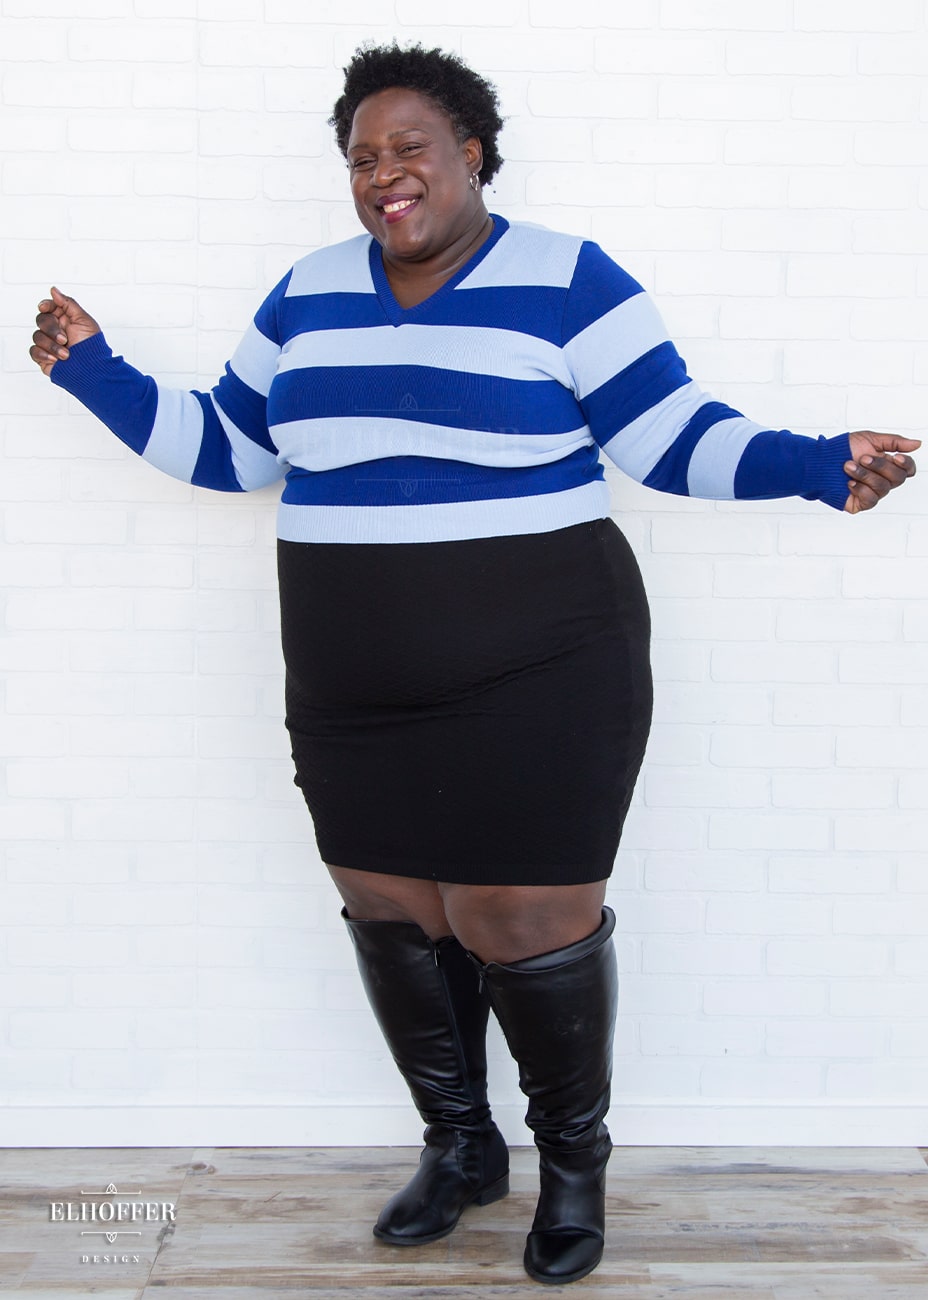 Adalgiza, a medium dark skinned 4xl model with short black super curly hair, is smiling while wearing a cropped v-neck sweater with fitted full length sleeves in horizontal thick stripes of bright blue and light blue.